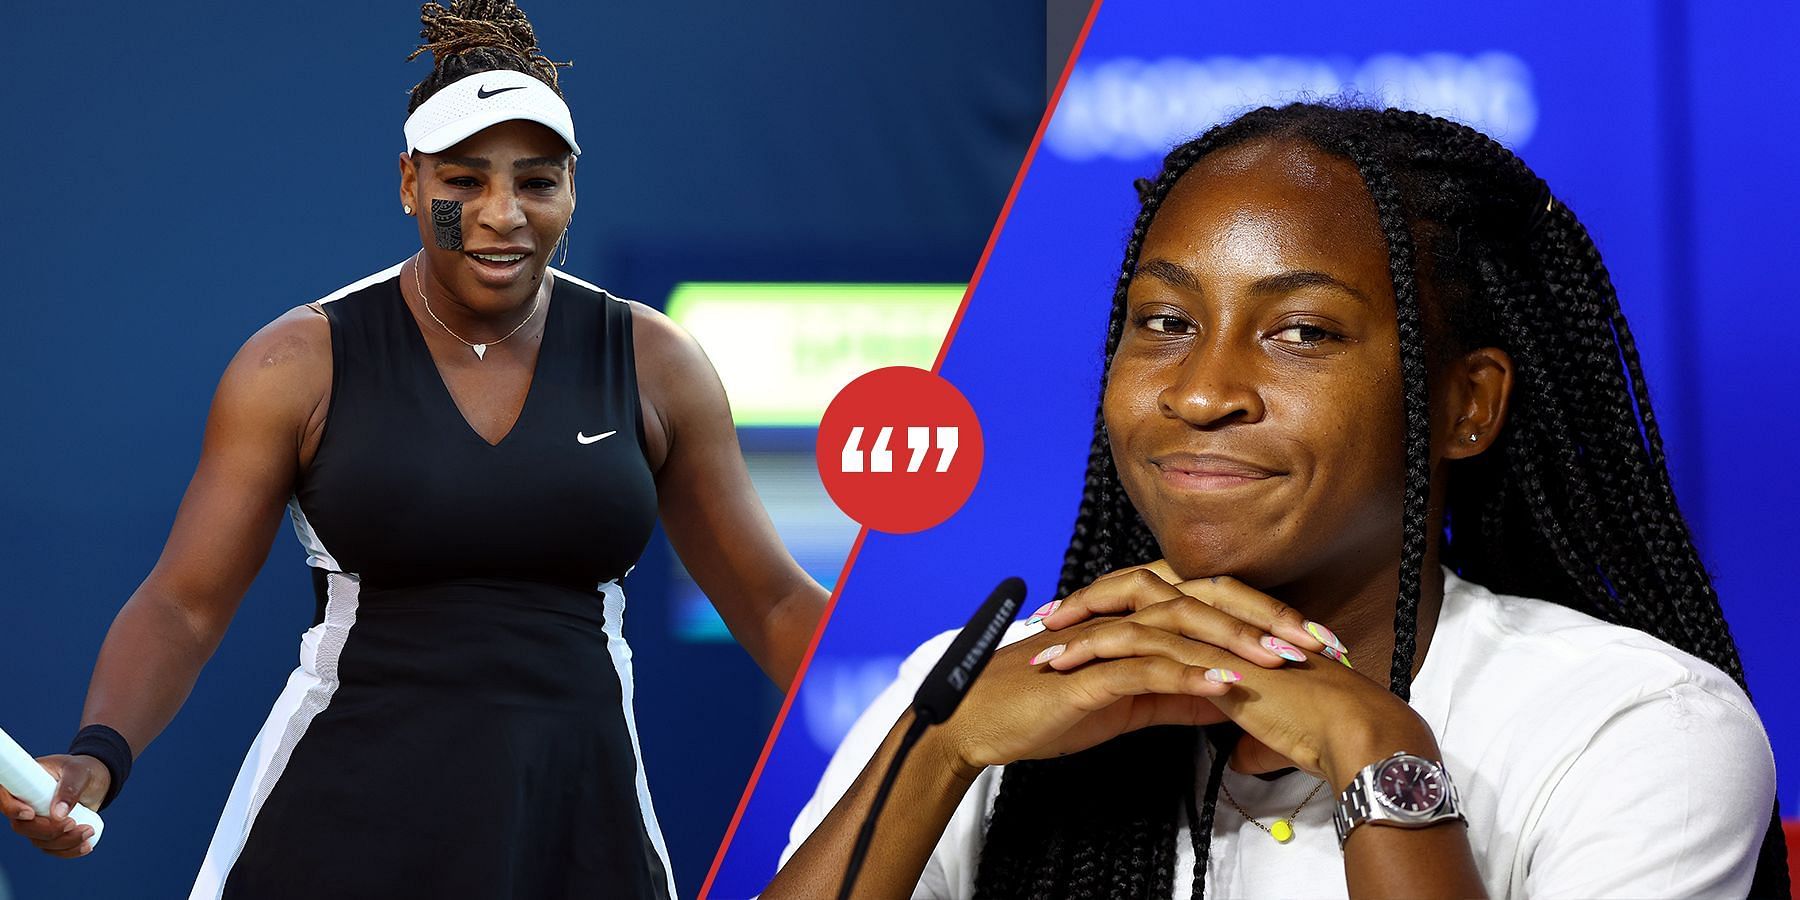 Coco Gauff fields questions, including those about Serena Williams, during US Open